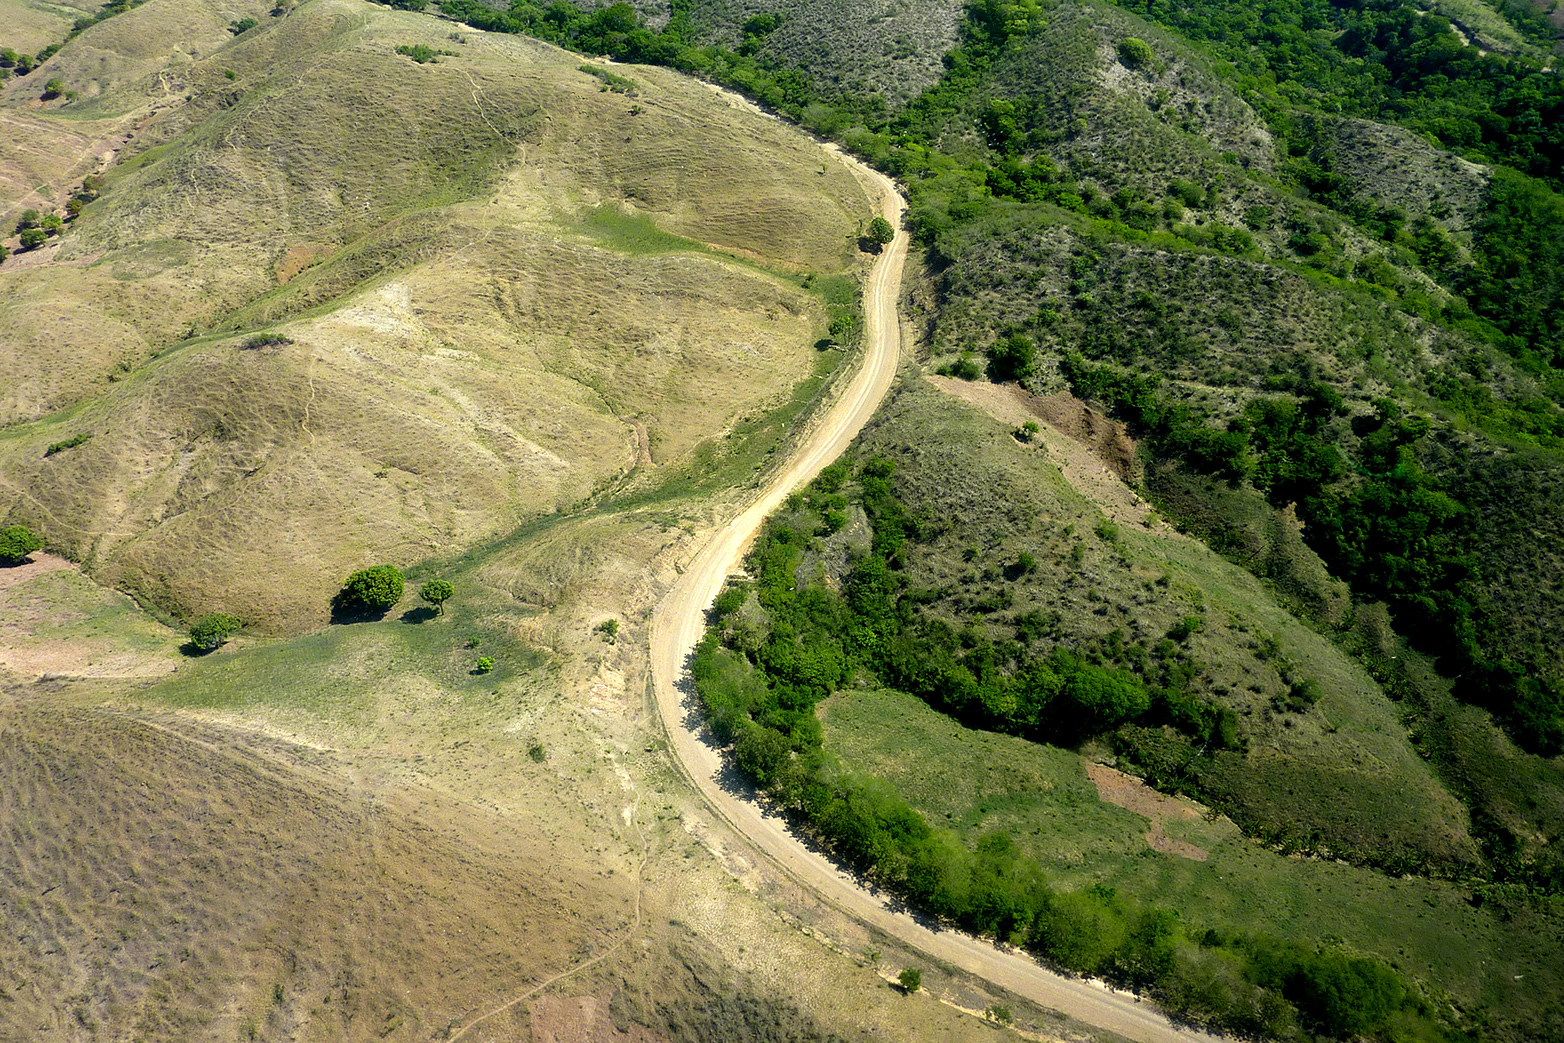 The border between Haiti and the Dominican Republic is easily recognizable by the vegetation cover. (Photo: UNEP - United Nations Environmental Programme)